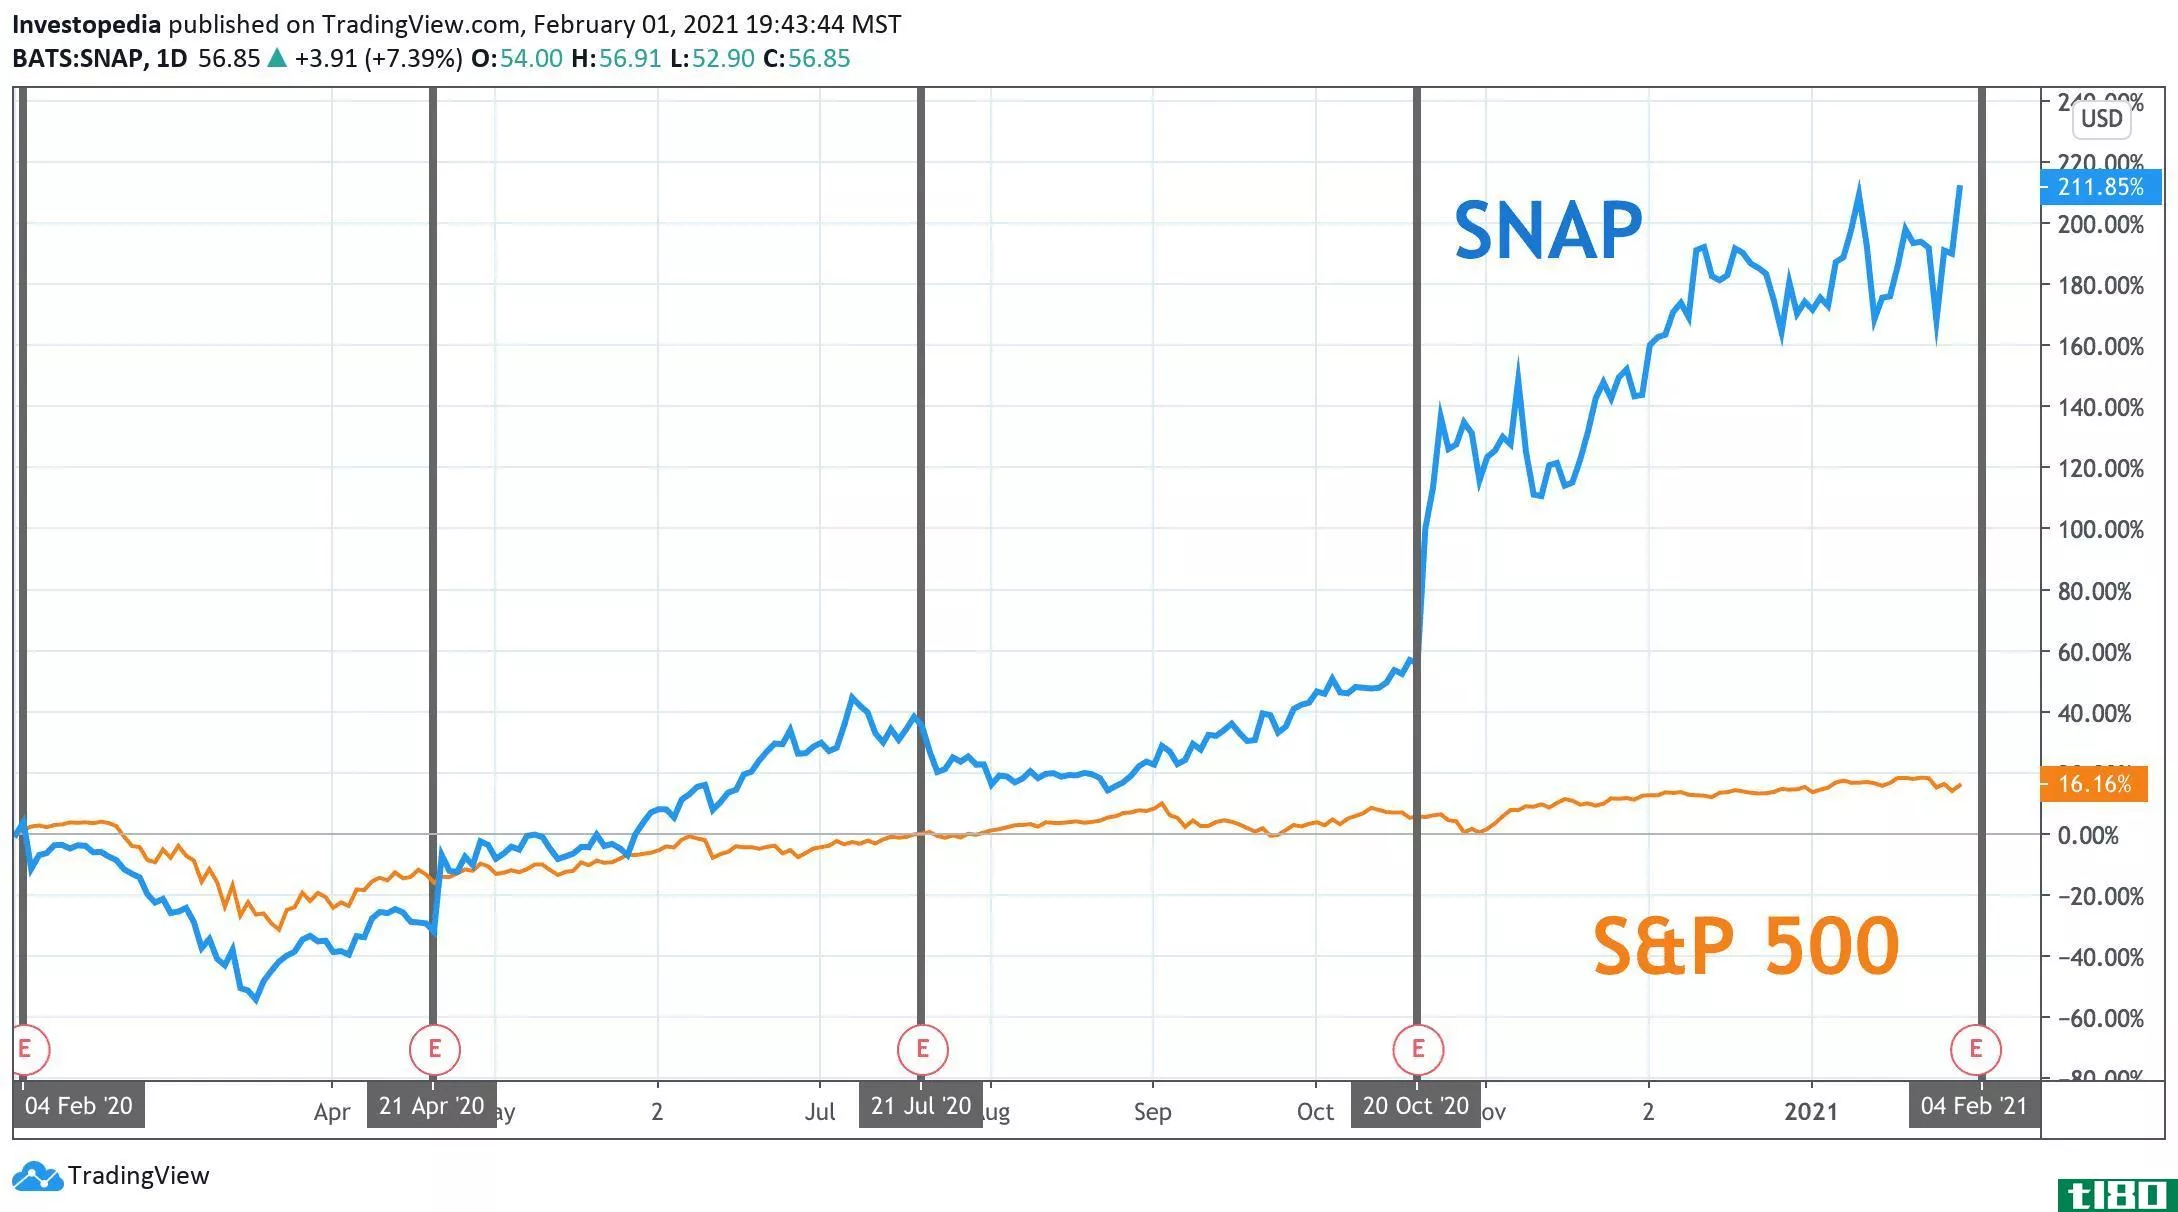 One Year Total Return for S&P 500 and Snap